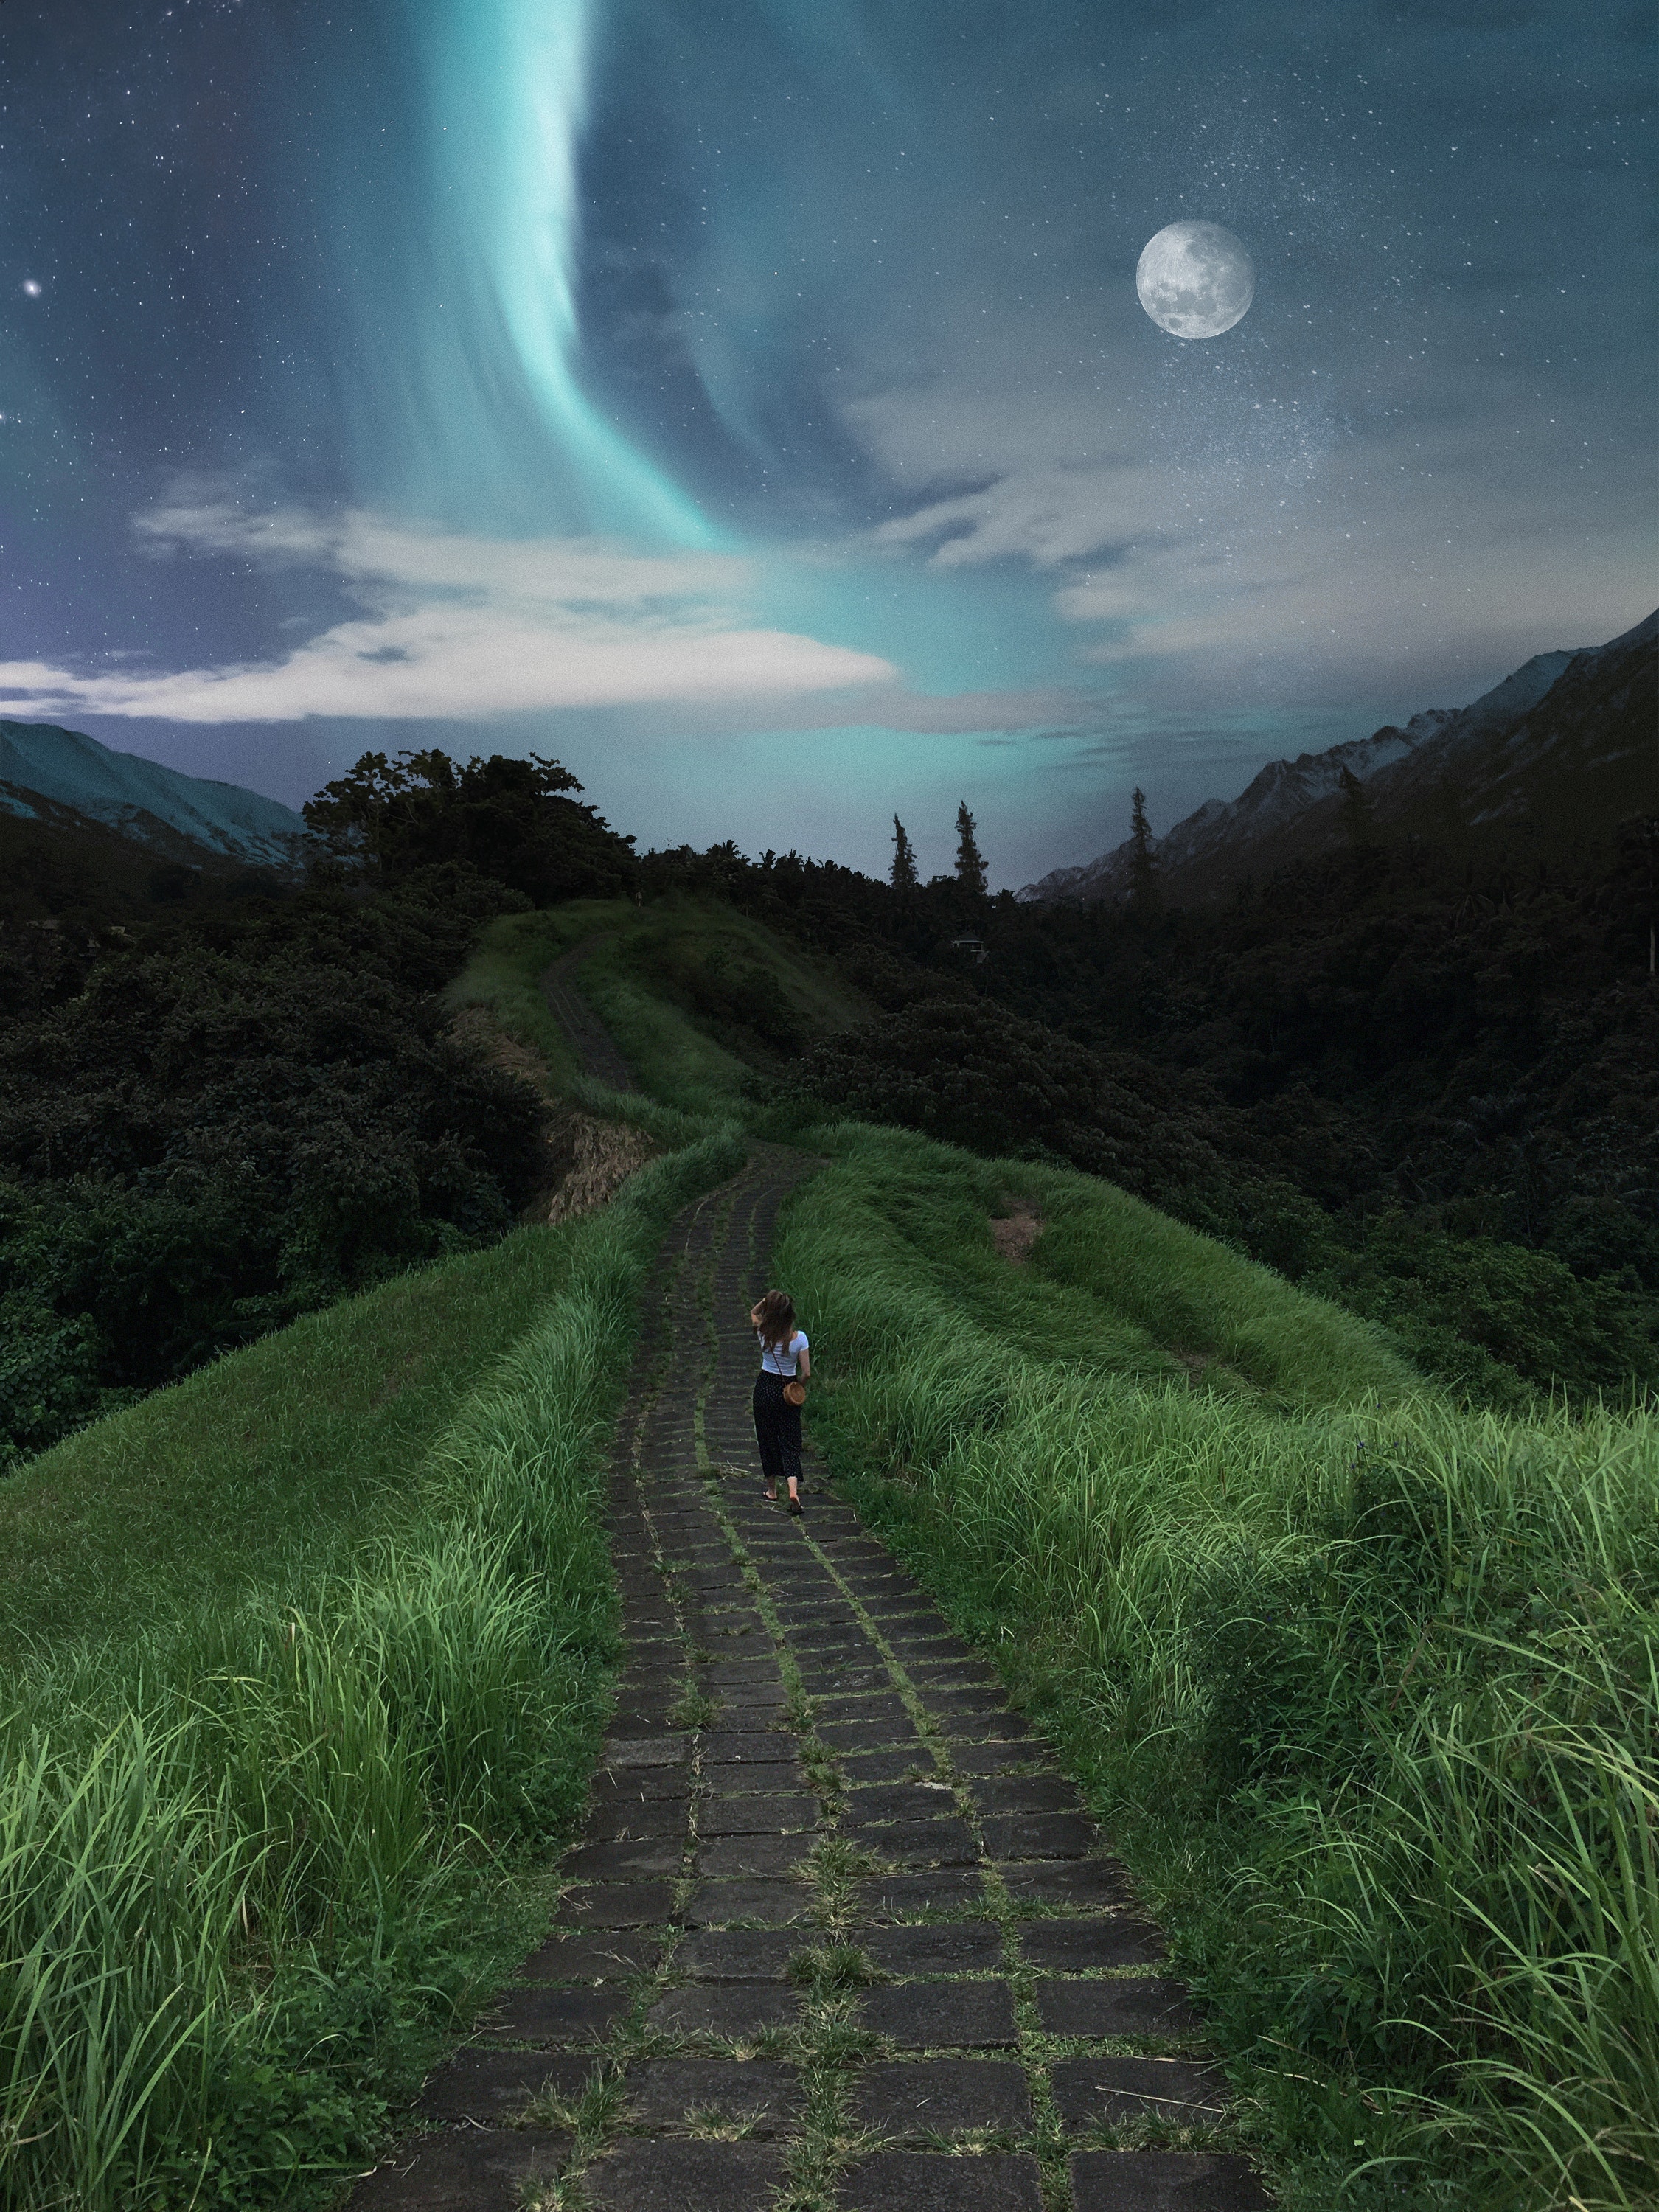 156804 download wallpaper girl, nature, grass, stars, path, loneliness screensavers and pictures for free